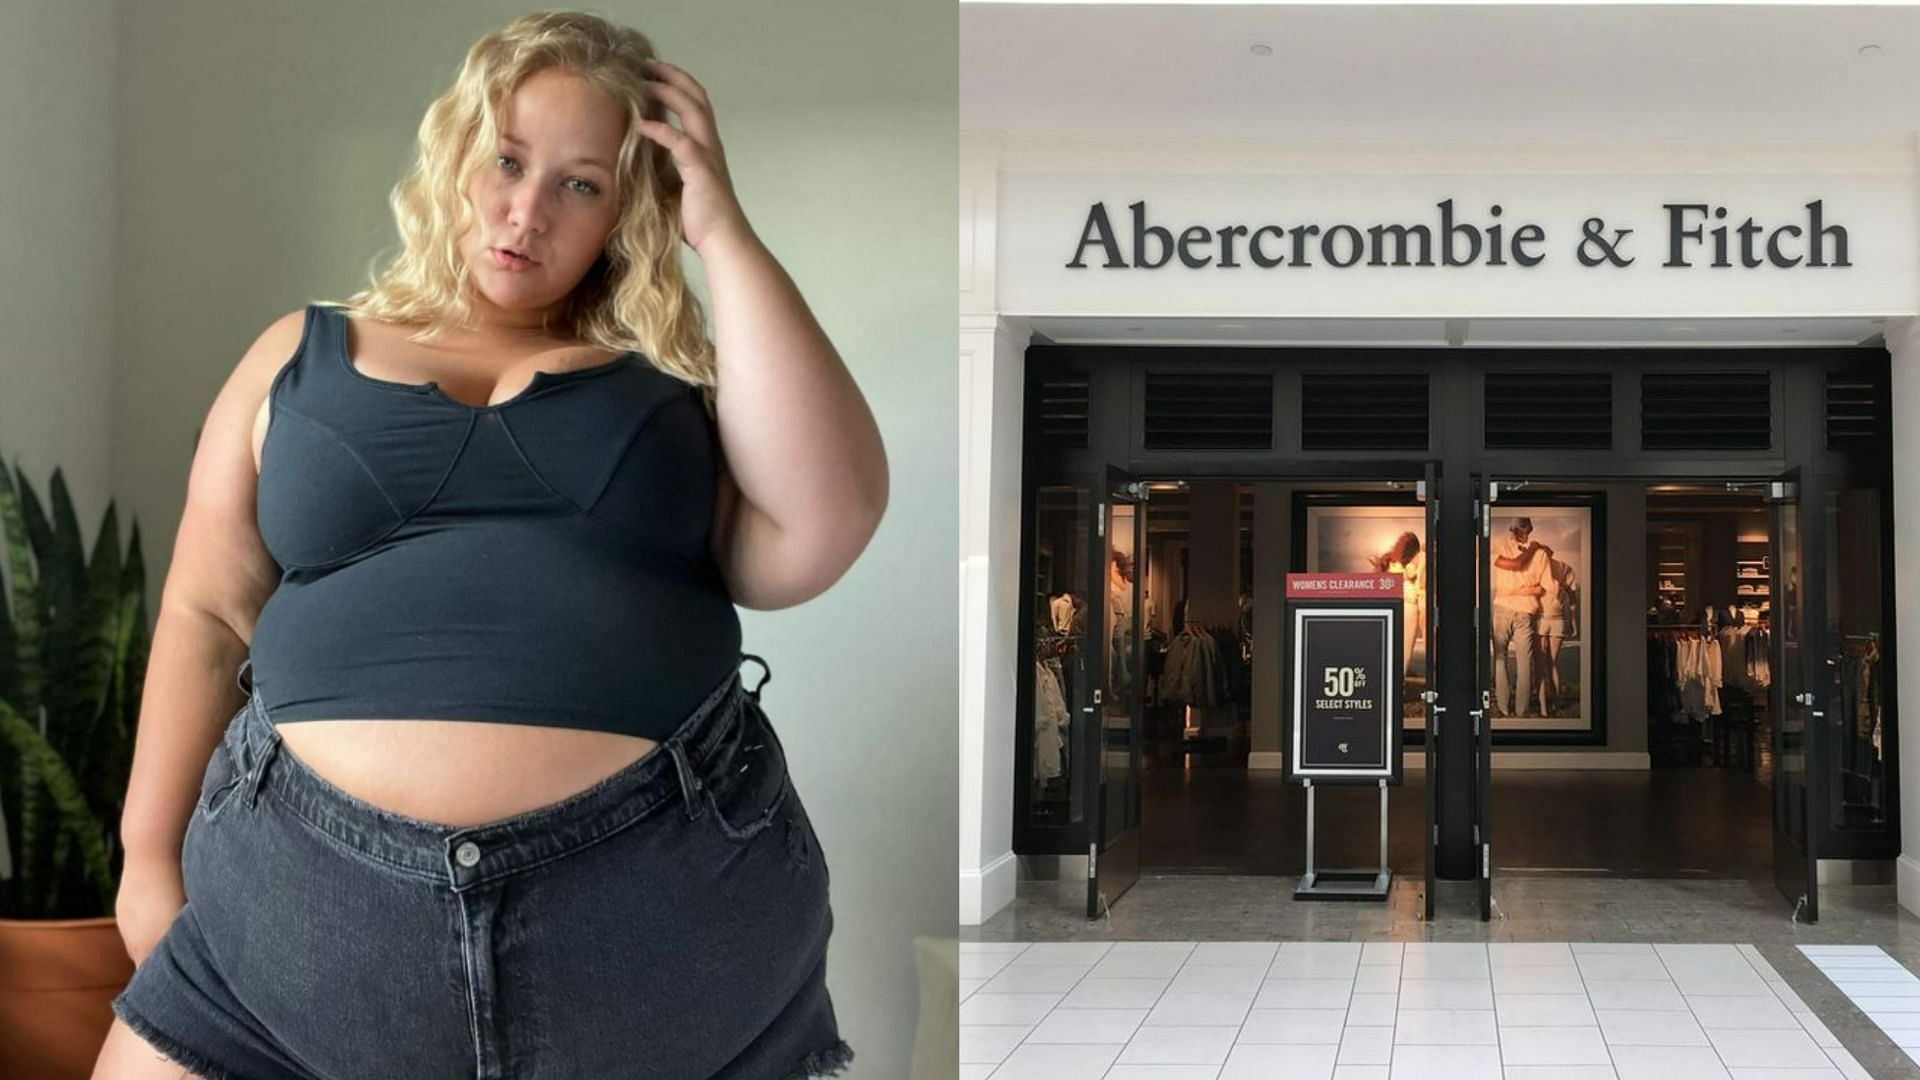 Abercrombie slammed for promoting obesity (Image via Chesschick01/Twitter and Getty Images)